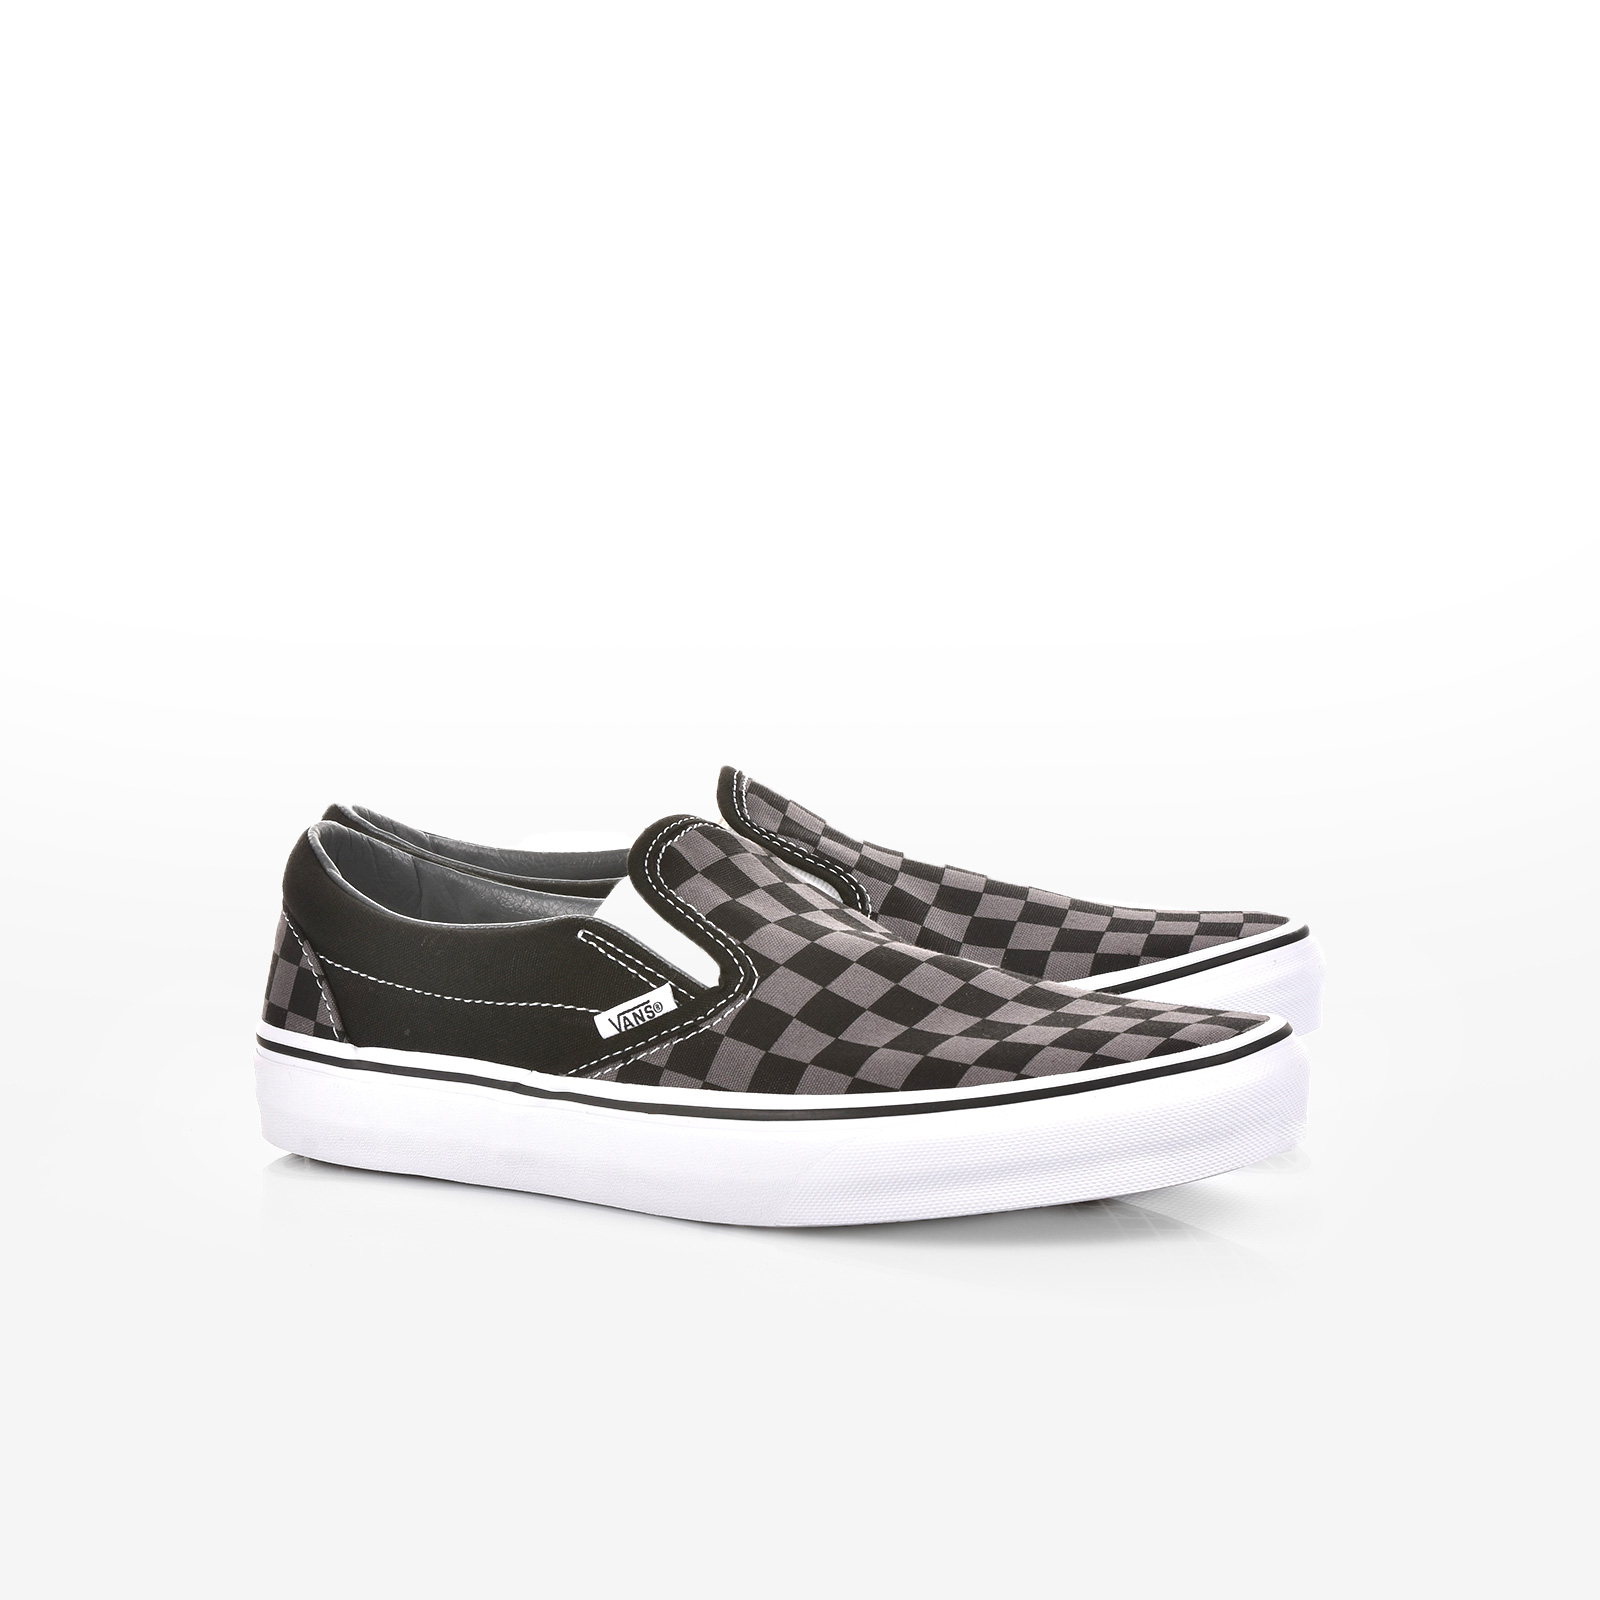 Vans - UA CLASSIC SLIP-ON BLACK/PEWTER CH - (CHECKERBOARD) BLACK/PEWTER Ανδρικά > Παπούτσια > Sneaker > Παπούτσι Low Cut